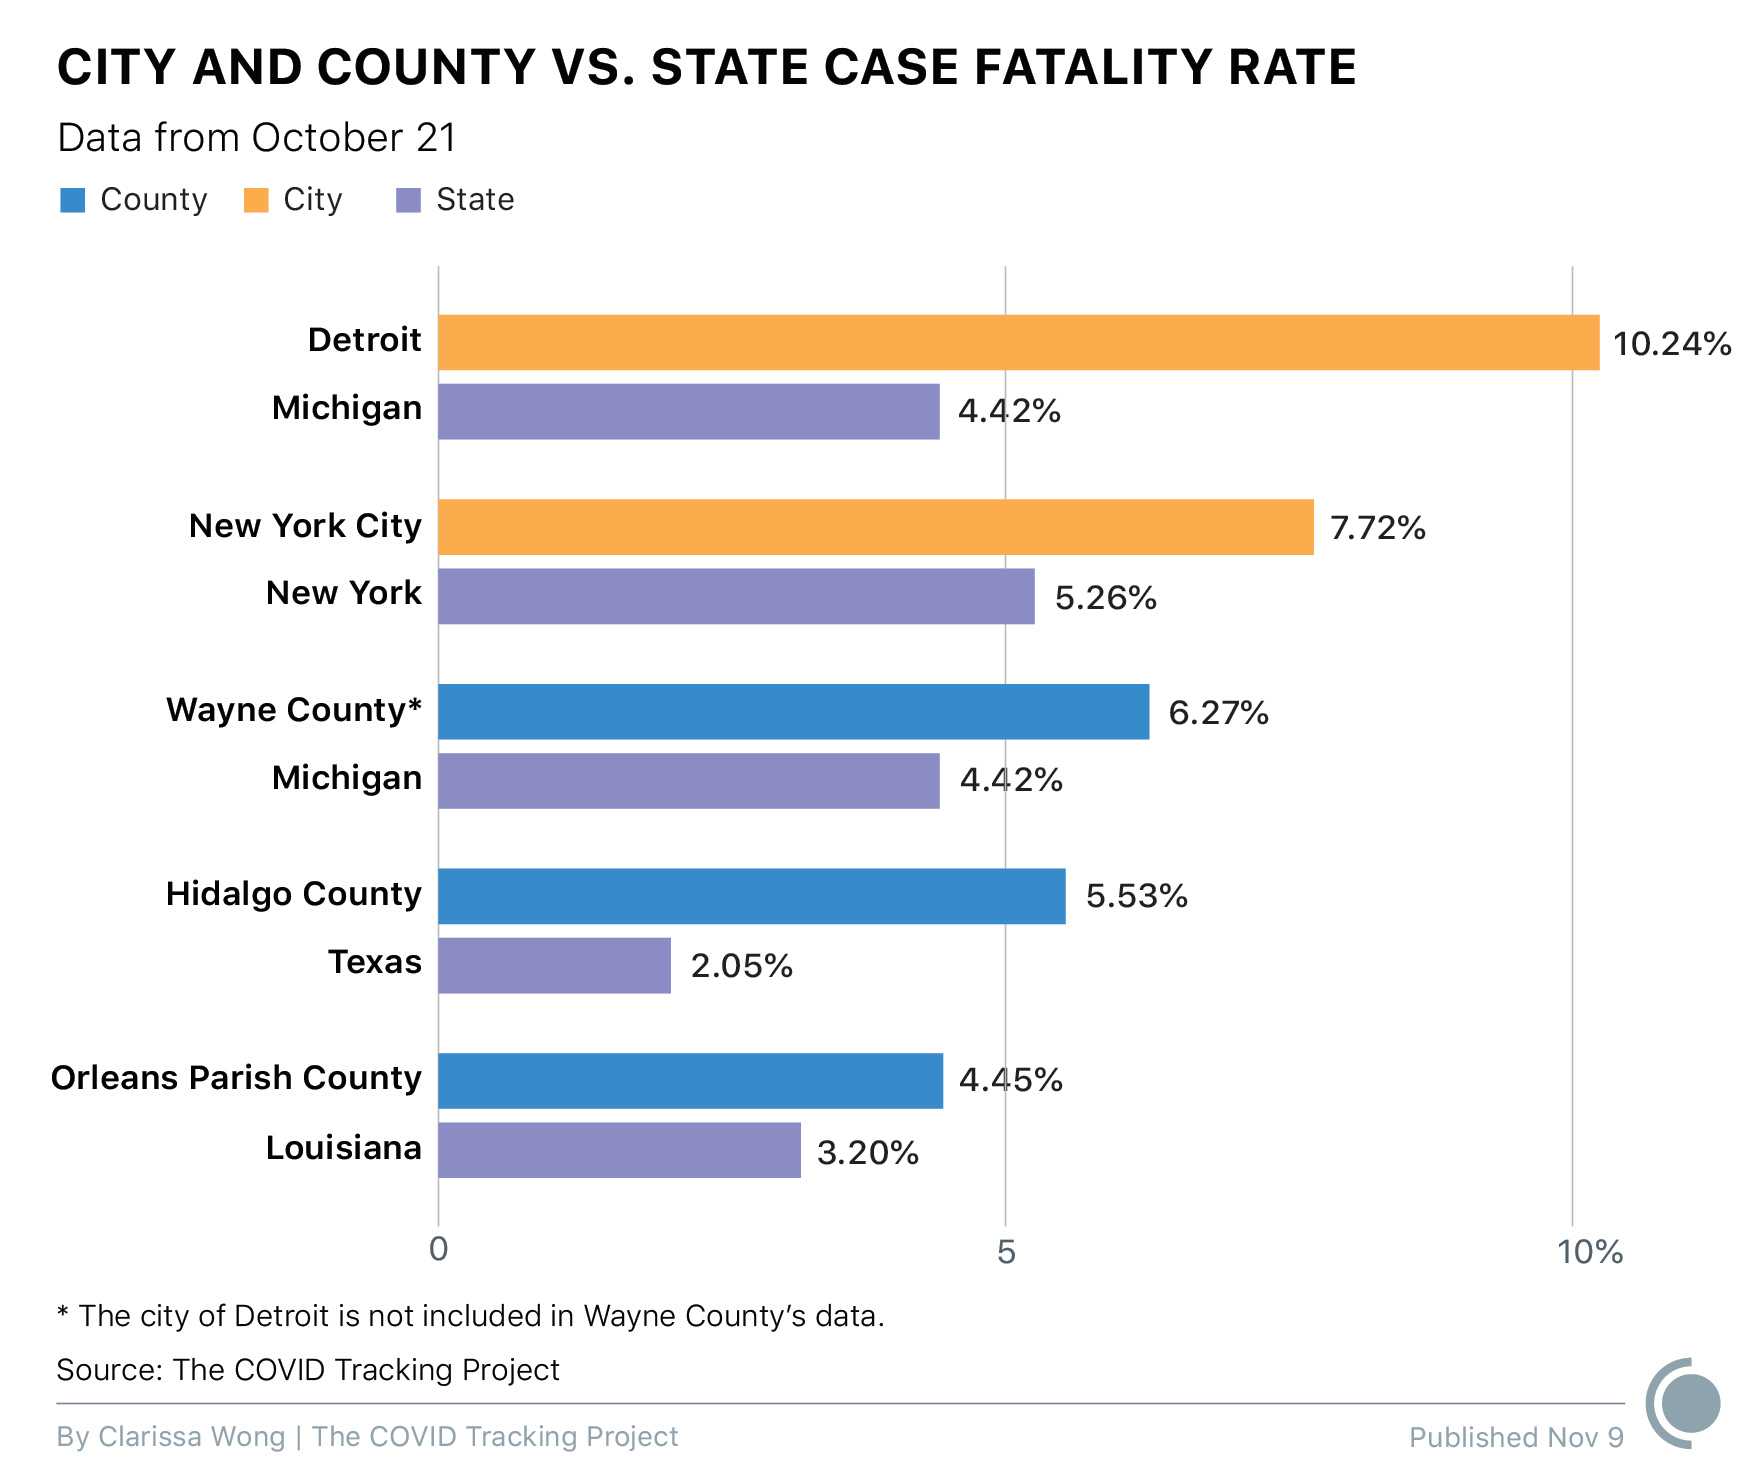 A double bar graph compares the case fatality rate of metropolitan areas (cities and counties) and the states they are located within. All data is as of October 21. The following locations are compared: Detroit vs. Michigan; New York City vs. New York; Wayne County (excluding Detroit) vs. Michigan); Hidalgo County vs. Texas; and Orleans Parish vs. Louisiana. For all locations examined, the cities and counties experience a higher case fatality rate than states they are located in.